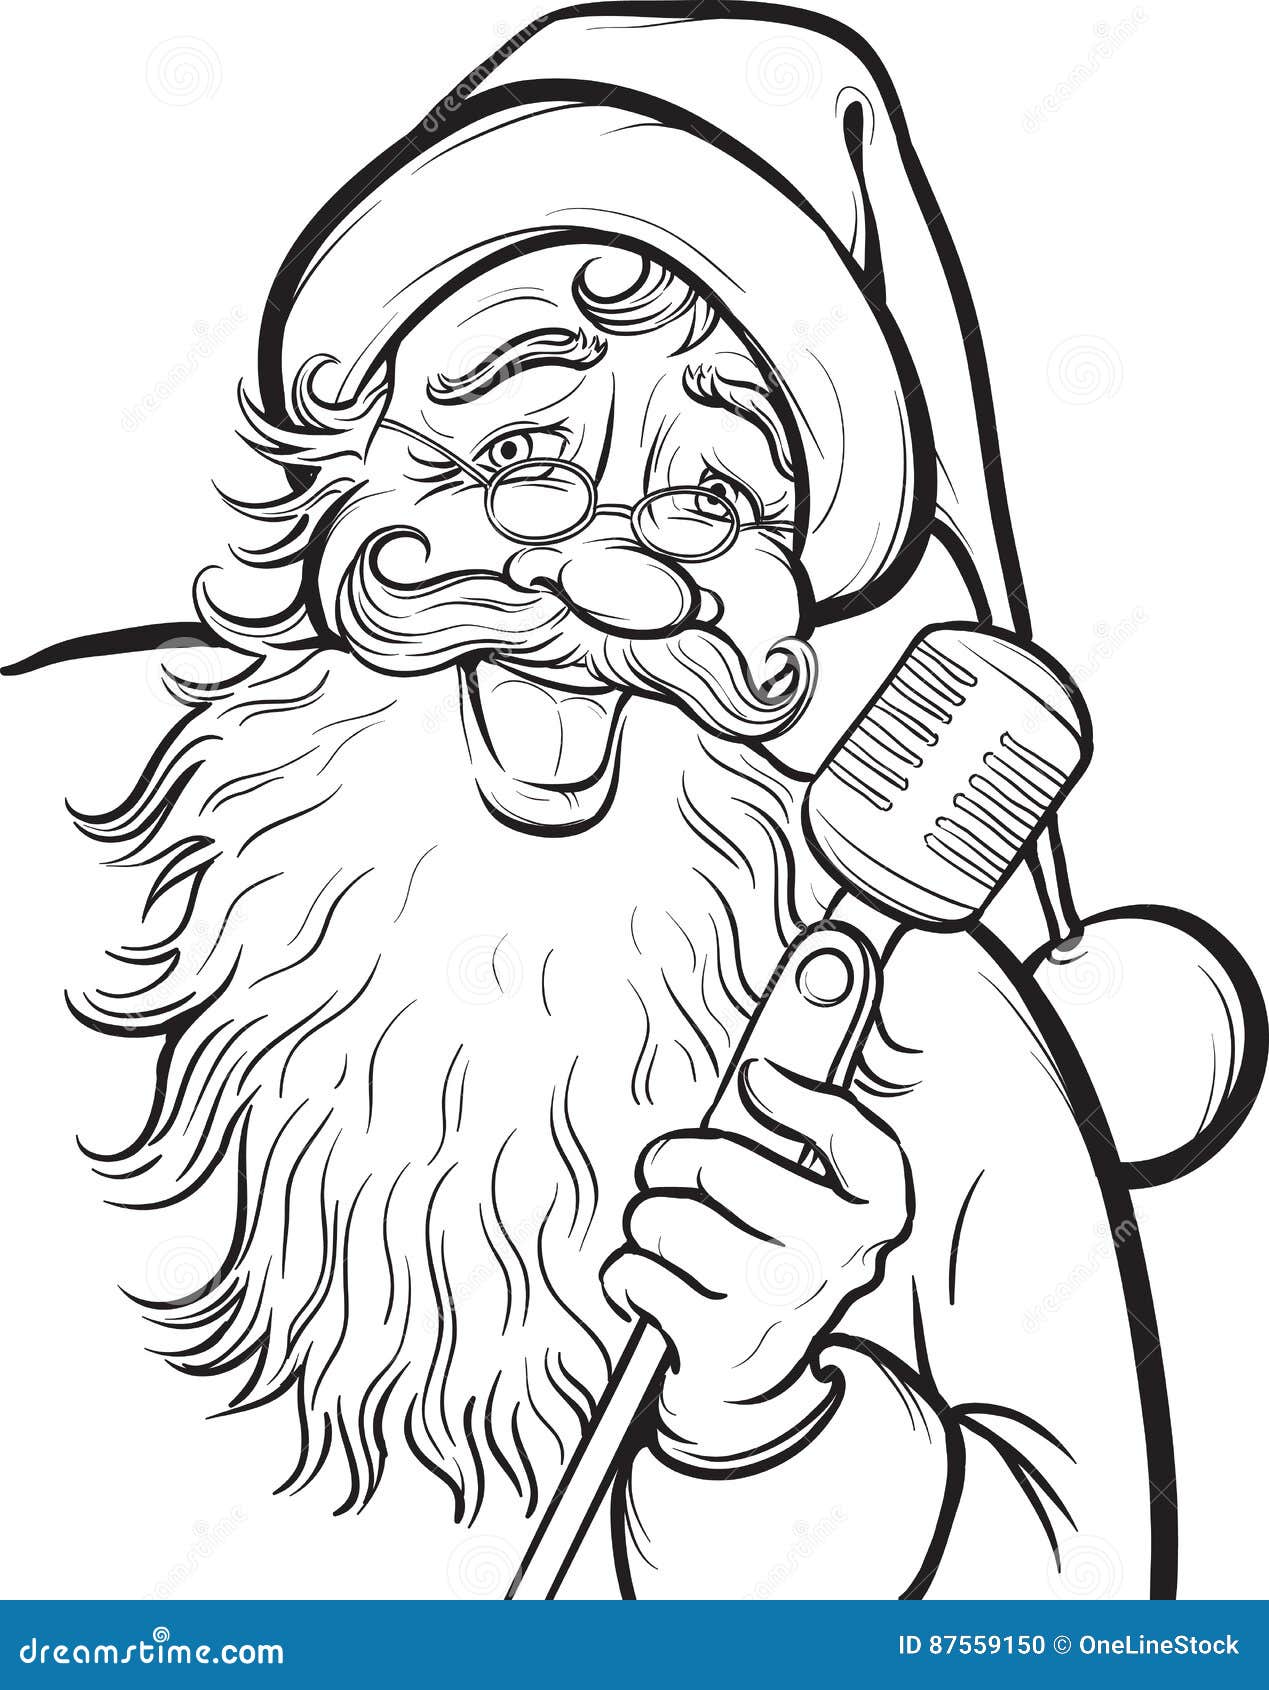 Christmas coloring page with singing Santa Claus